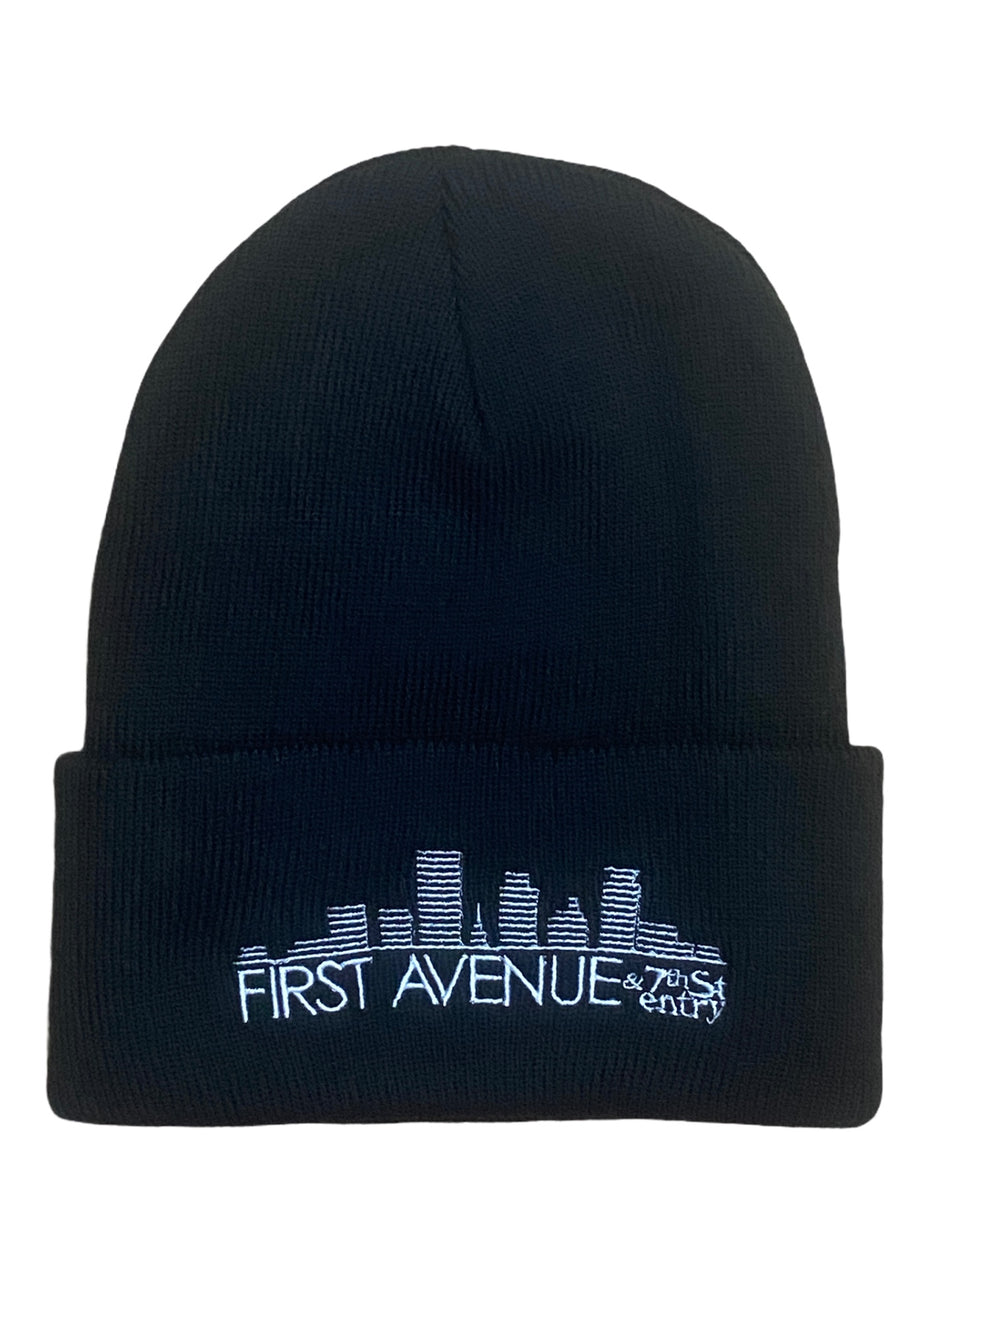 First Avenue Skyline Official T UP Beanie Hat Embroidery Brand New Prince